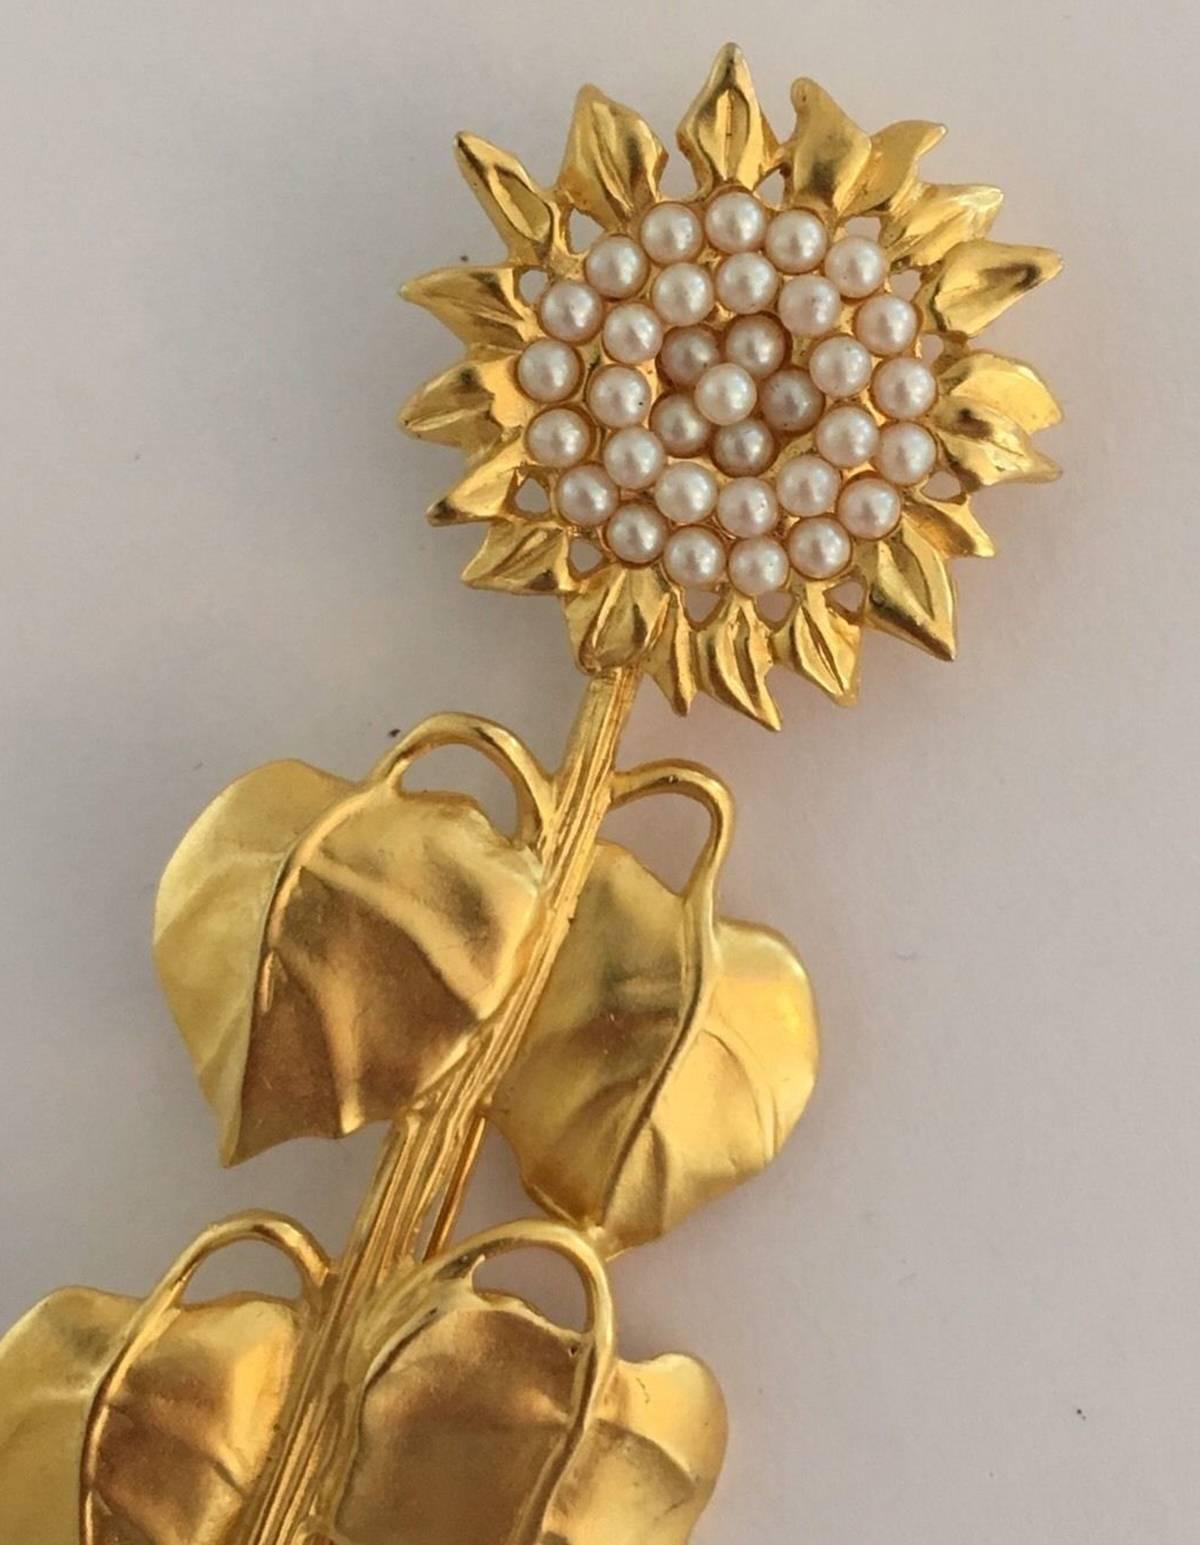 Rare Vintage Karl Lagerfeld Brooch featuring a Beautiful Matte Gold Sunflower accented with Glass Pearls. Measuring Approx. 3.5” Signed: KL. A perfect complement to every wardrobe… Illuminating your Look with a touch of class!
